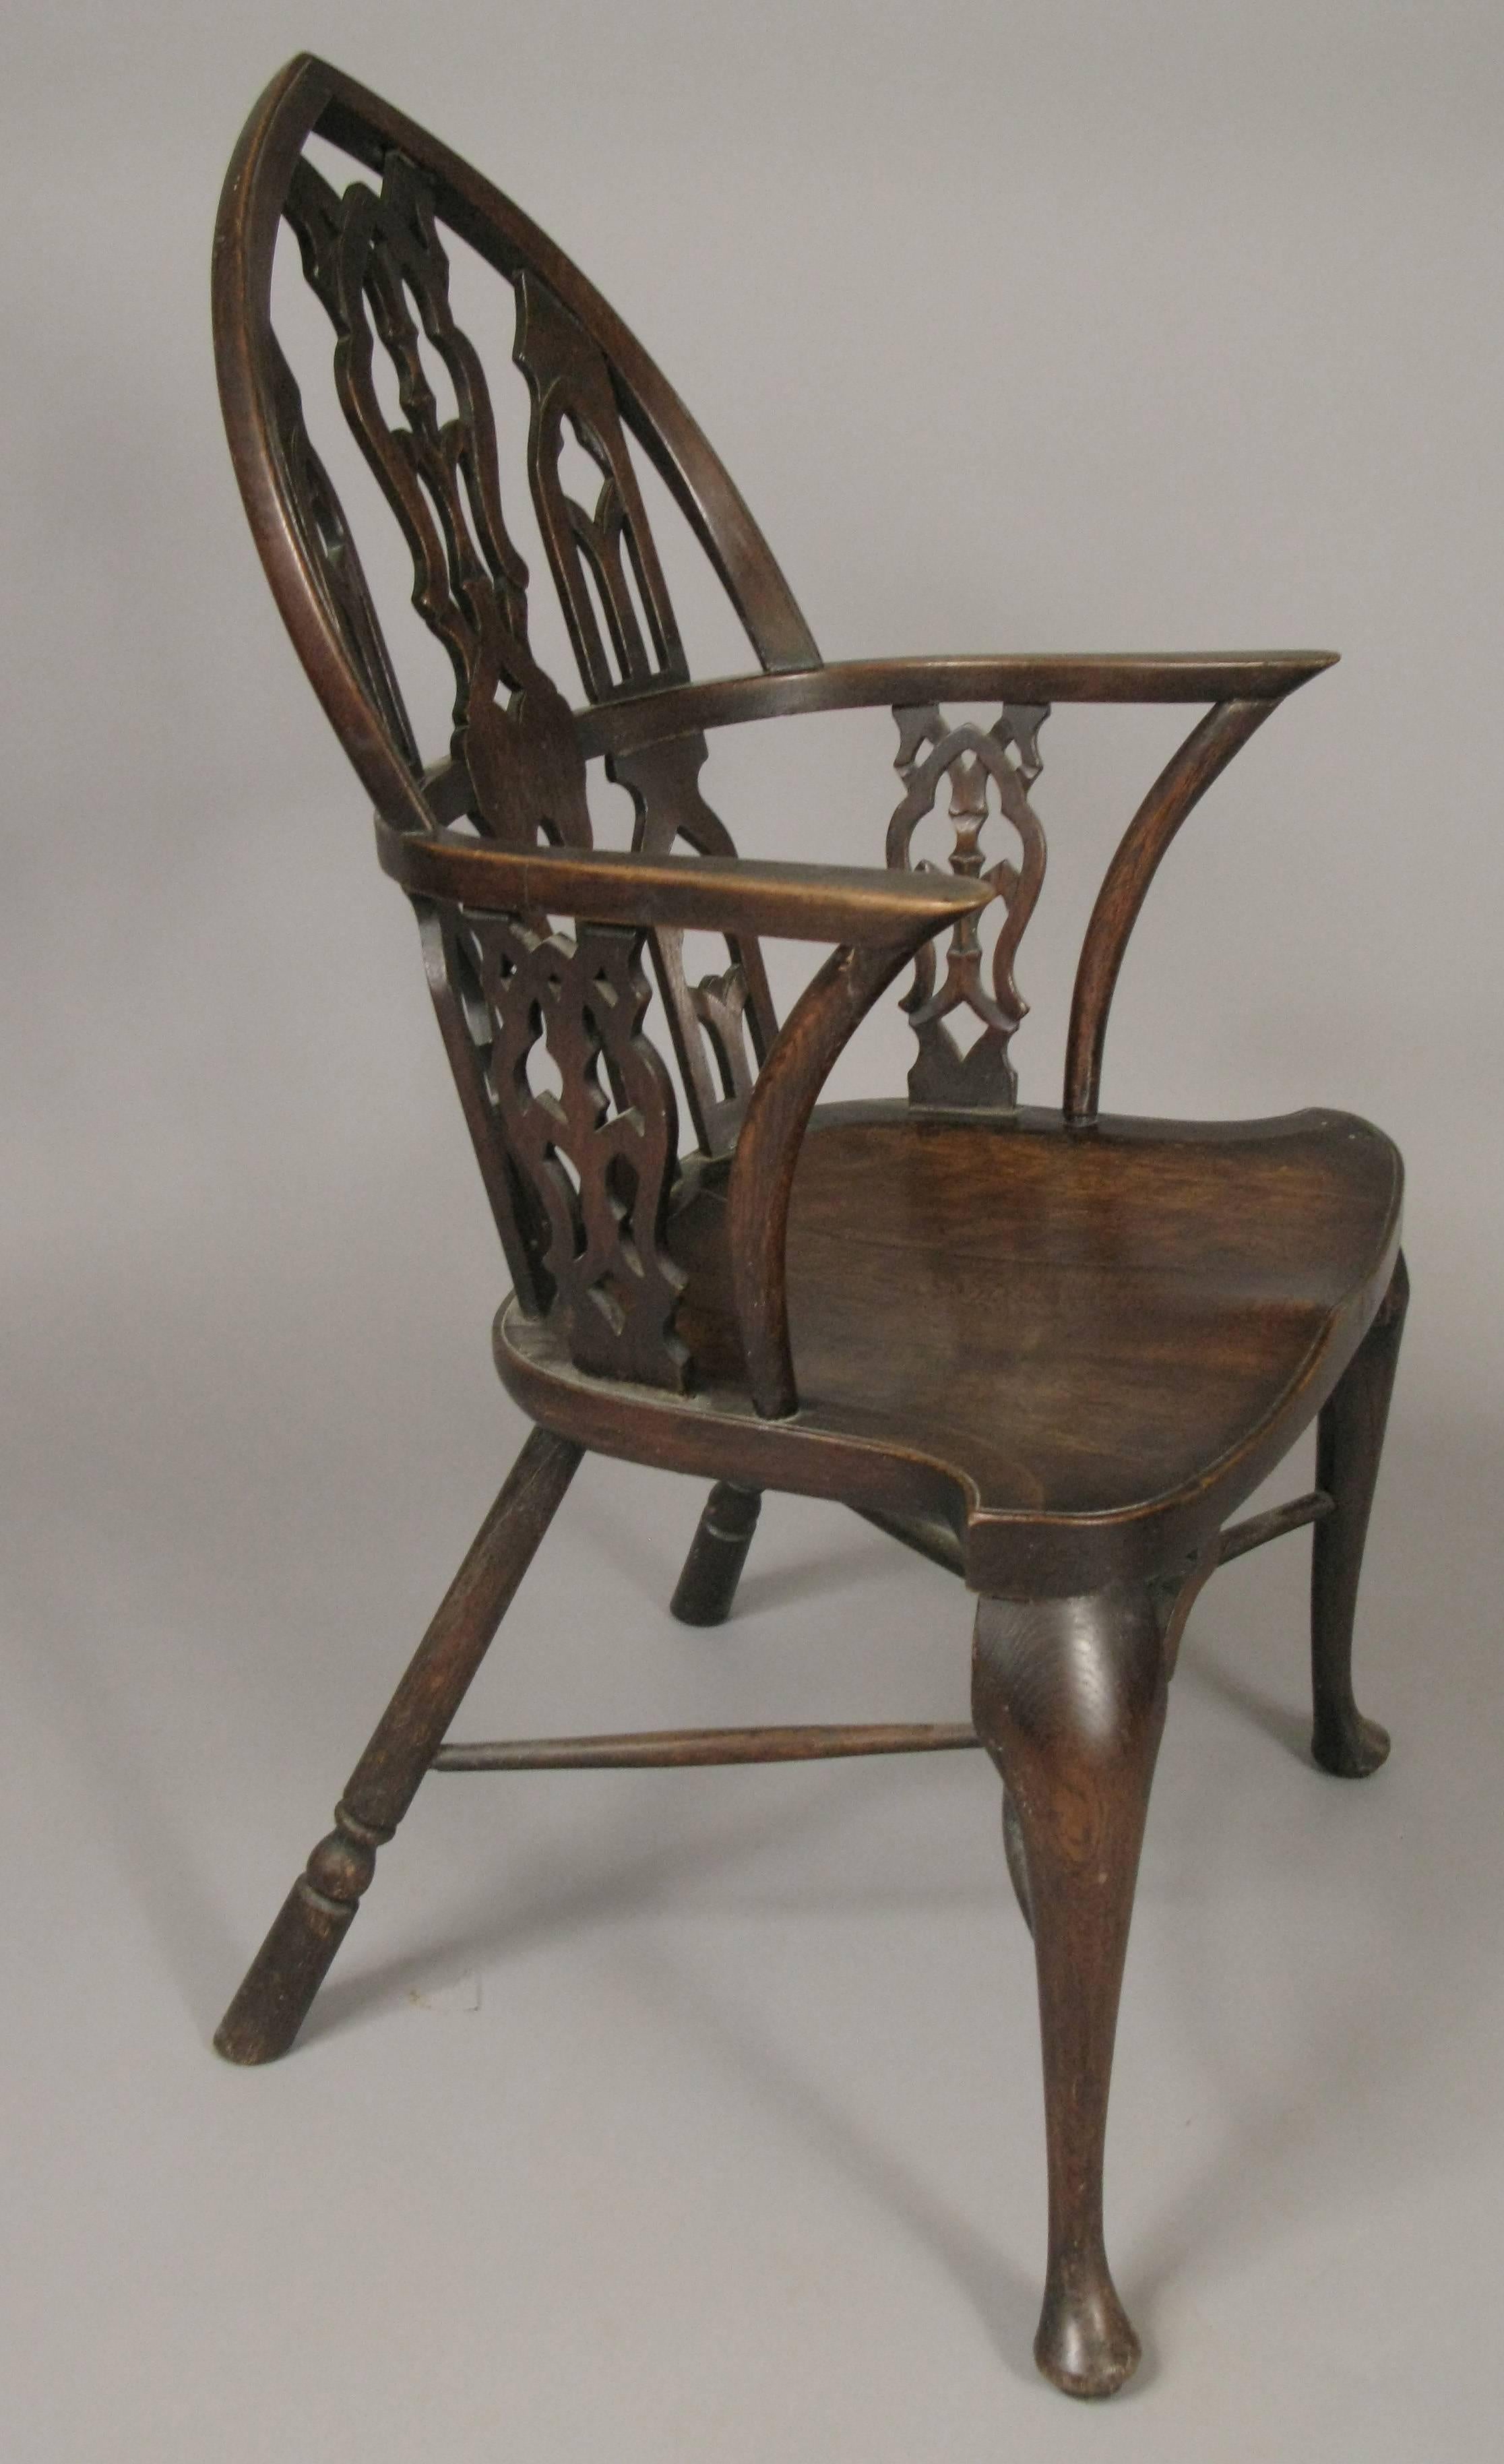 A very handsome early 20th century armchair with Gothic design backrest. very well made and beautiful patina.